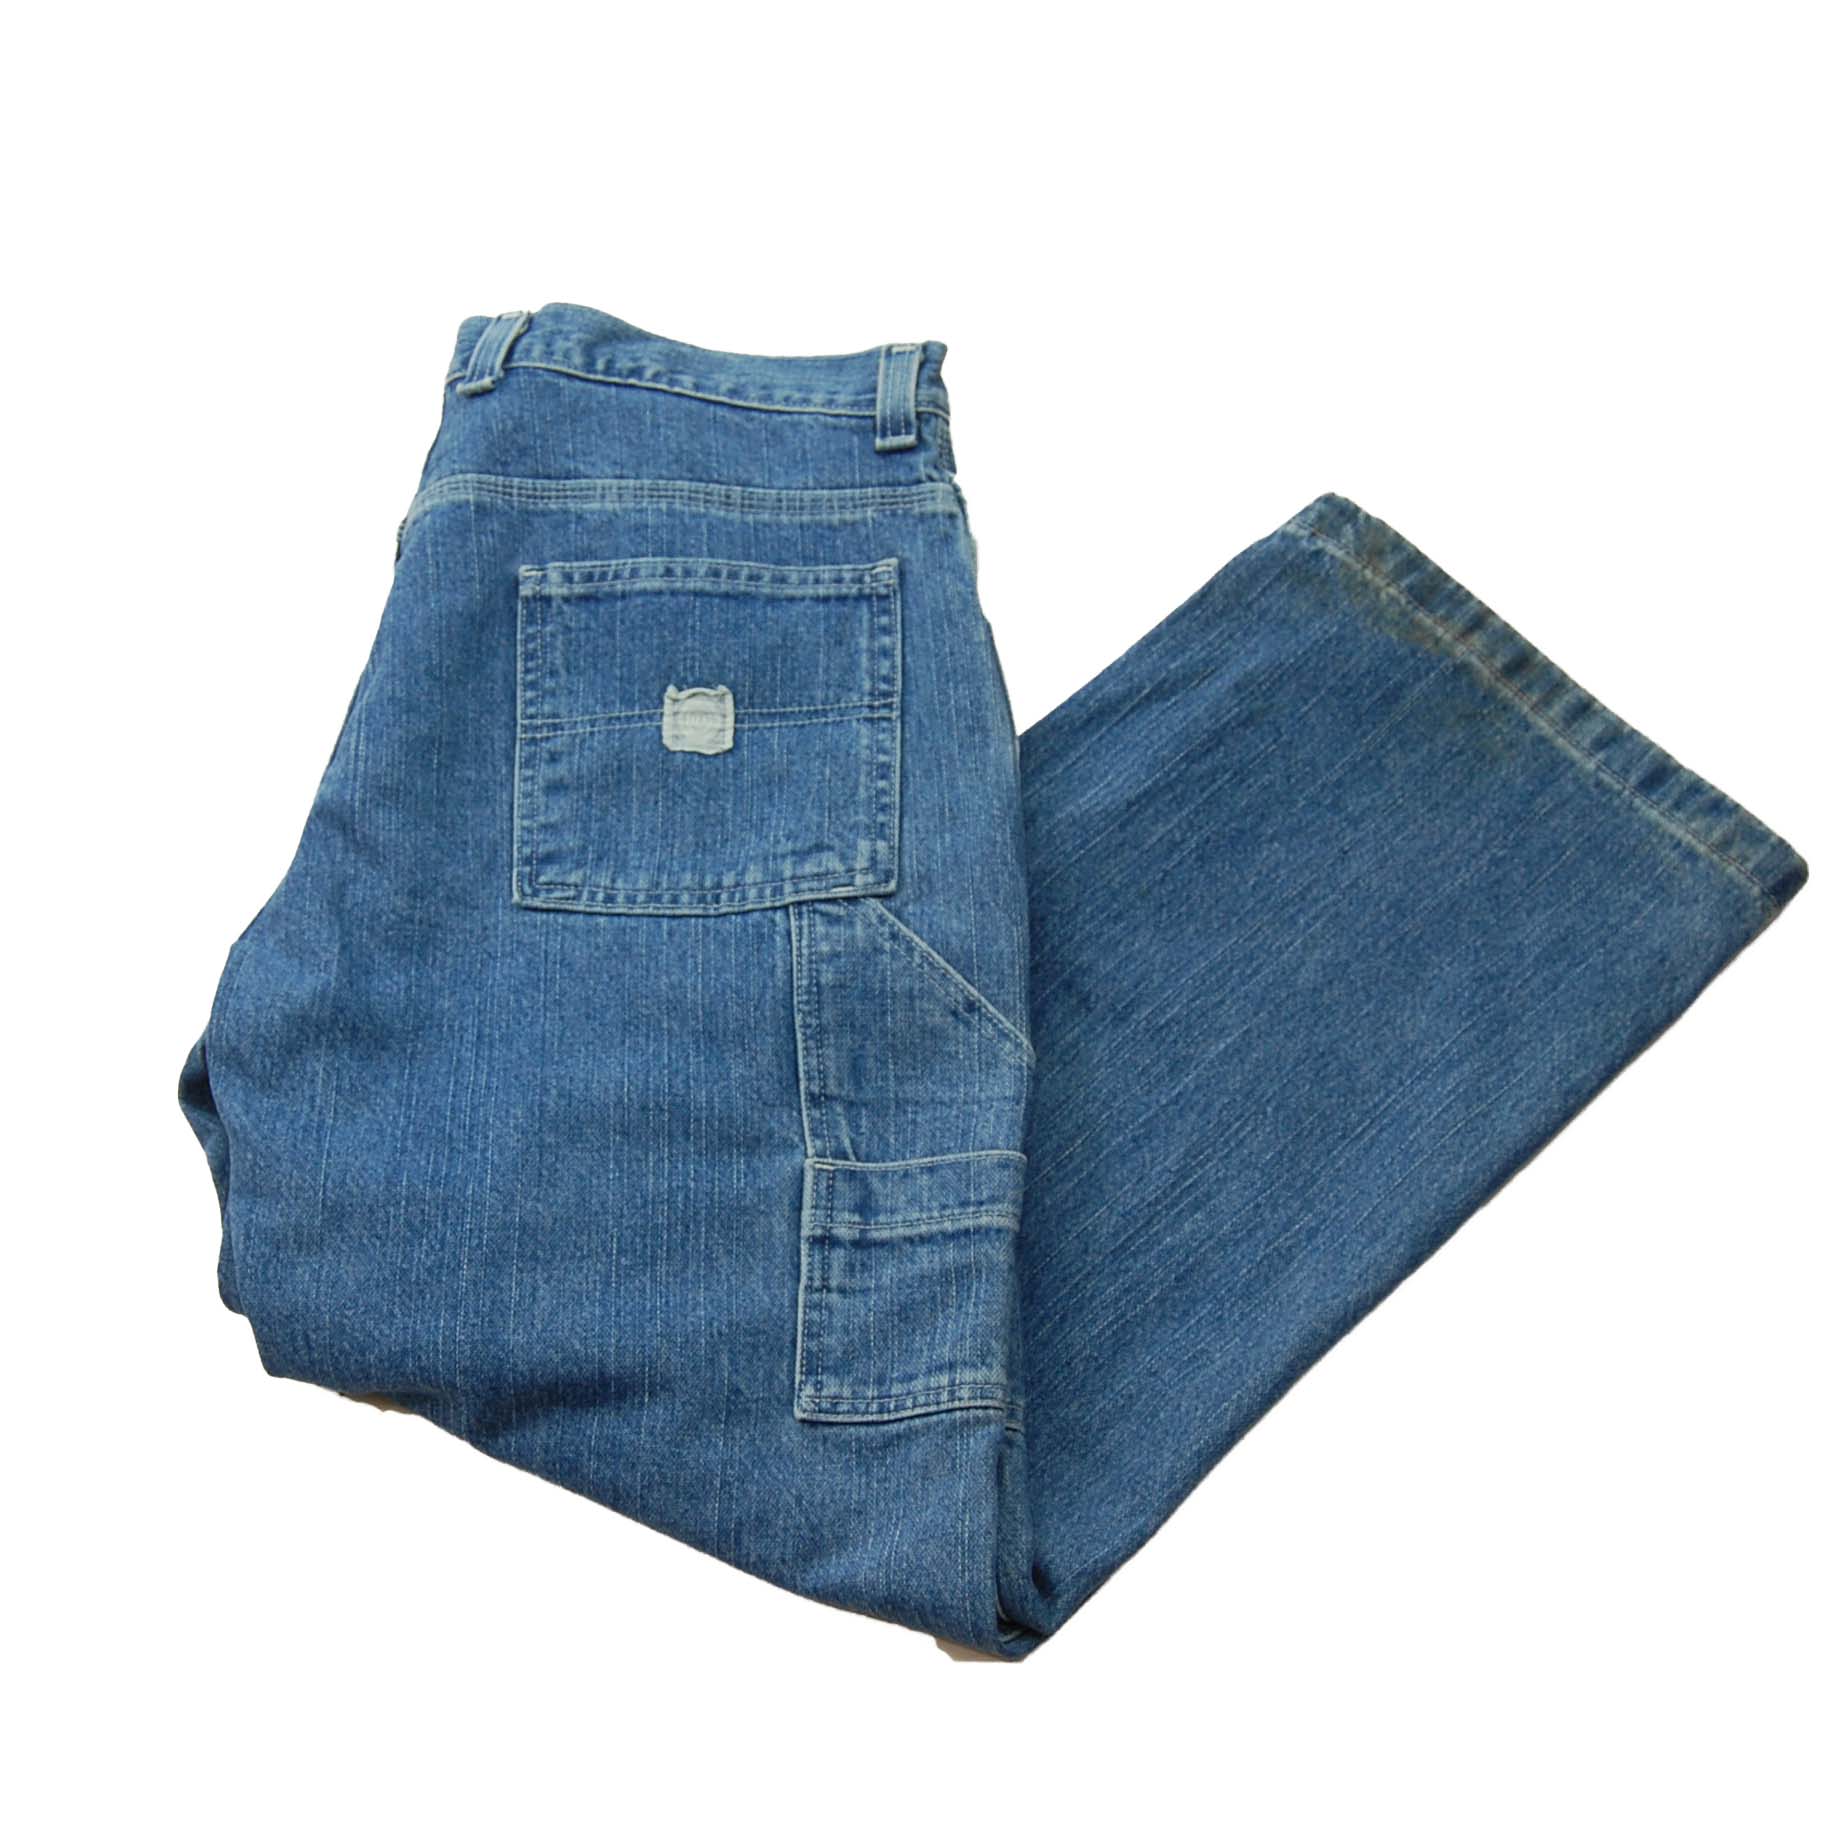 Faded Glory Carpenter Jeans - W38 X L30 - Blue 17 Vintage Clothing